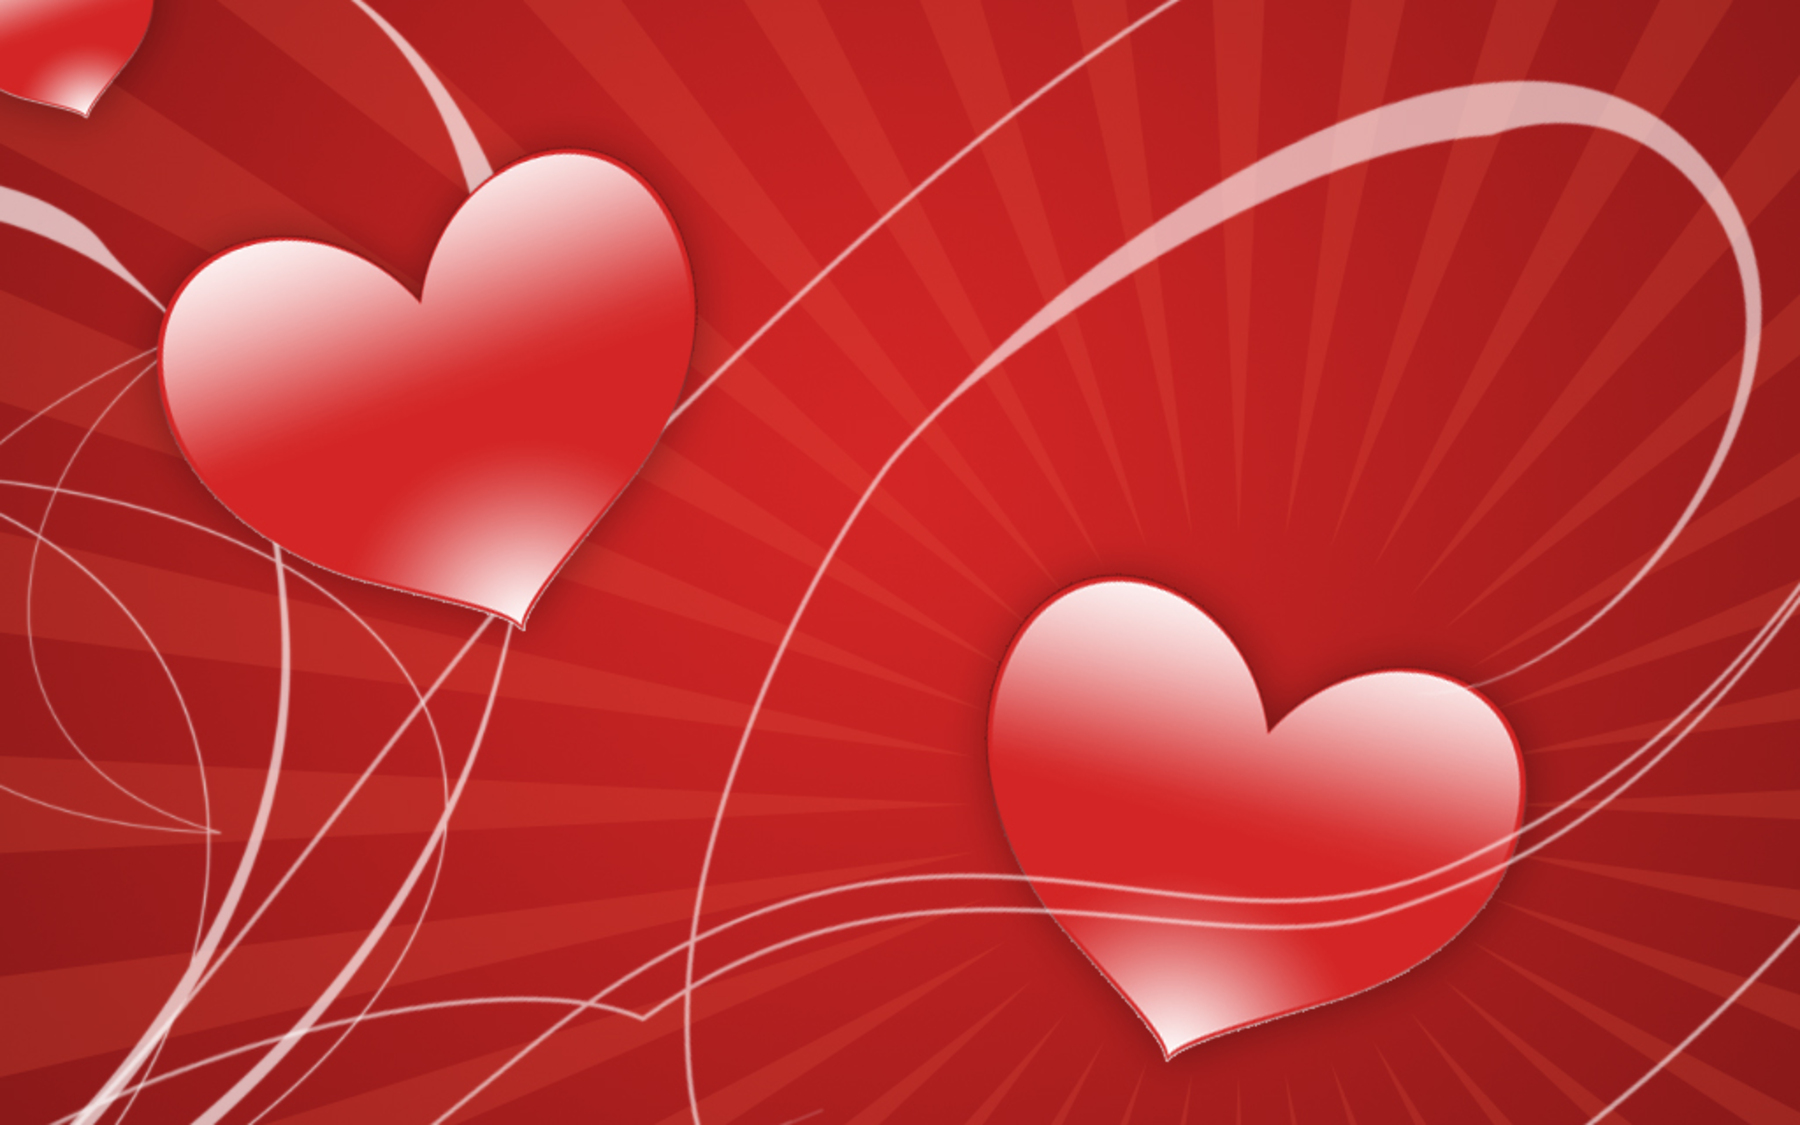 Red Love Heart Wallpaper Is A Great For Your Puter